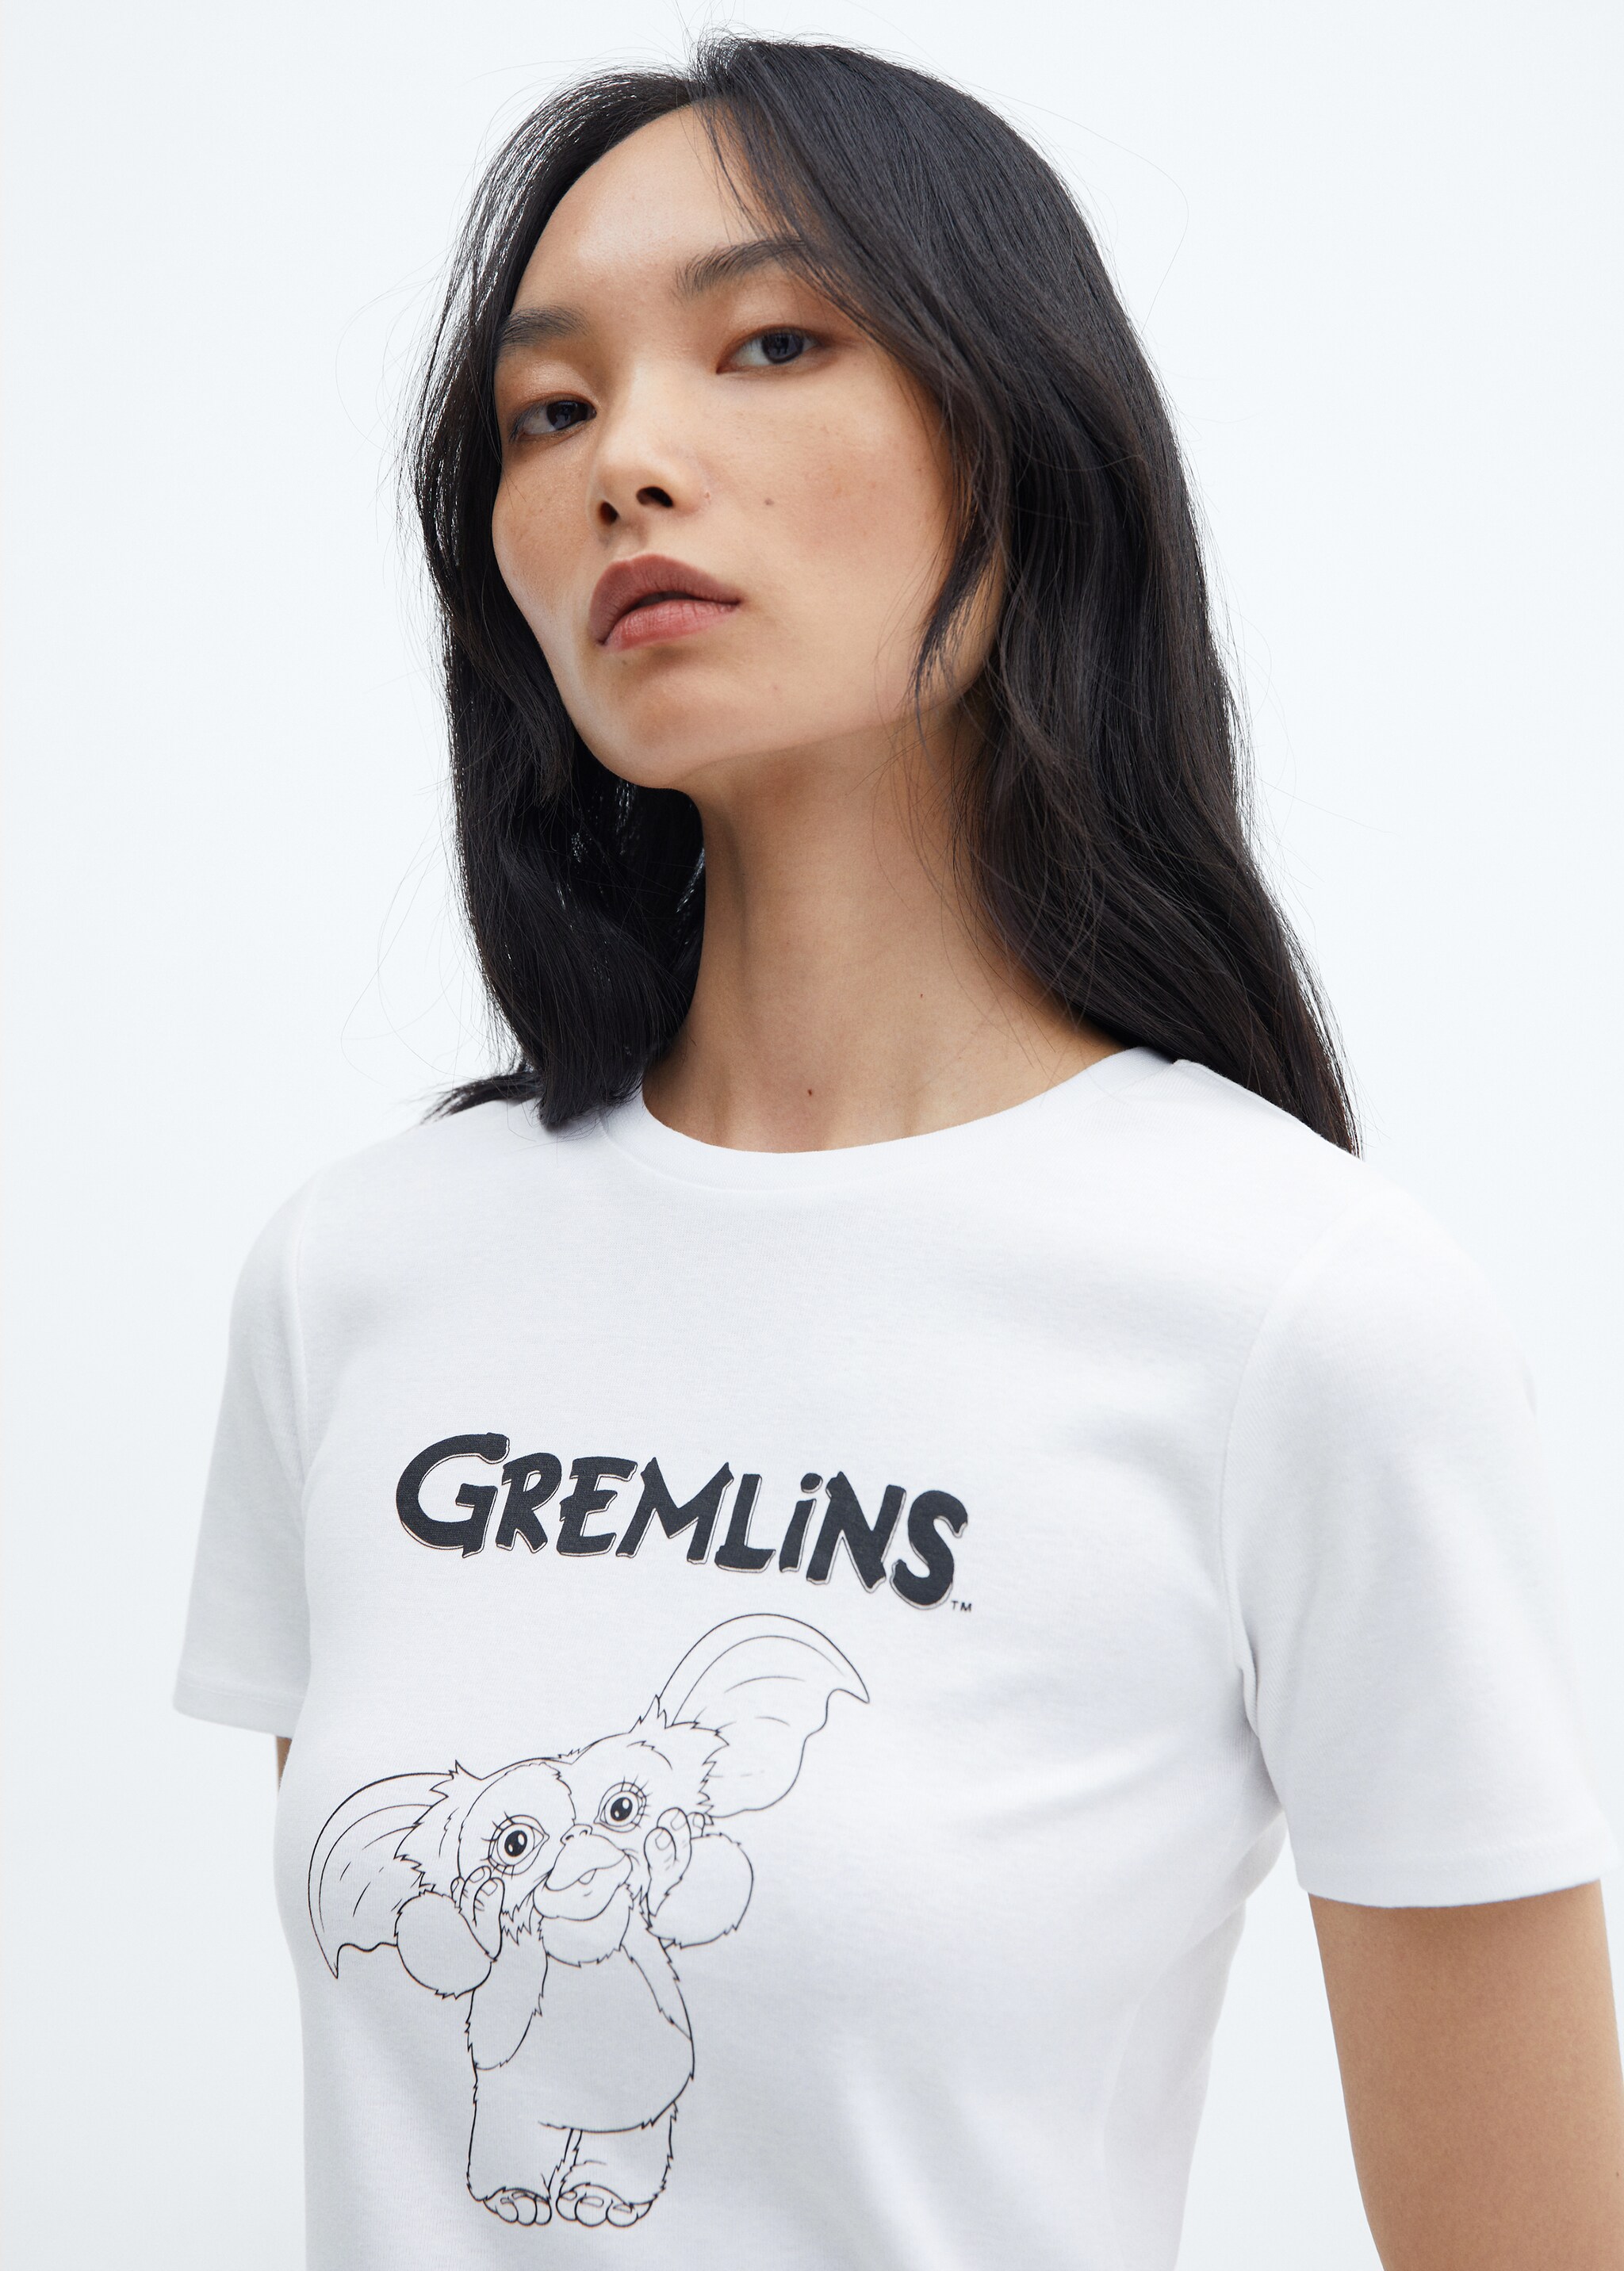 Gremlins T-shirt - Details of the article 1